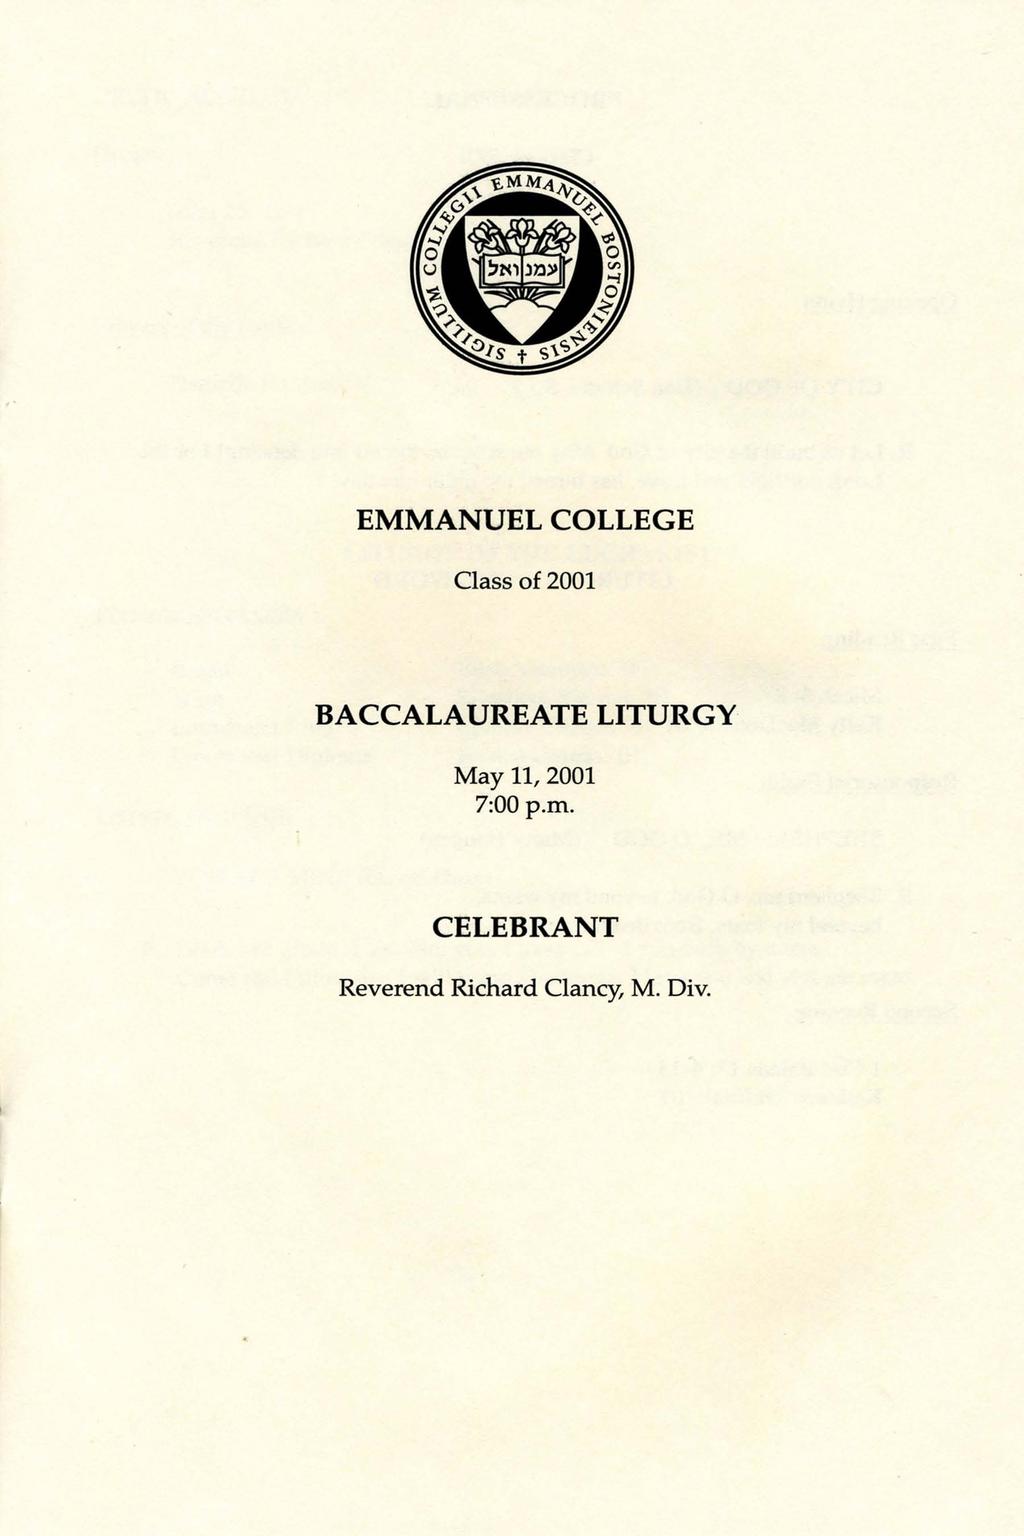 EMMANUEL COLLEGE Class of 2001 BACCALAUREATE LITURGY May